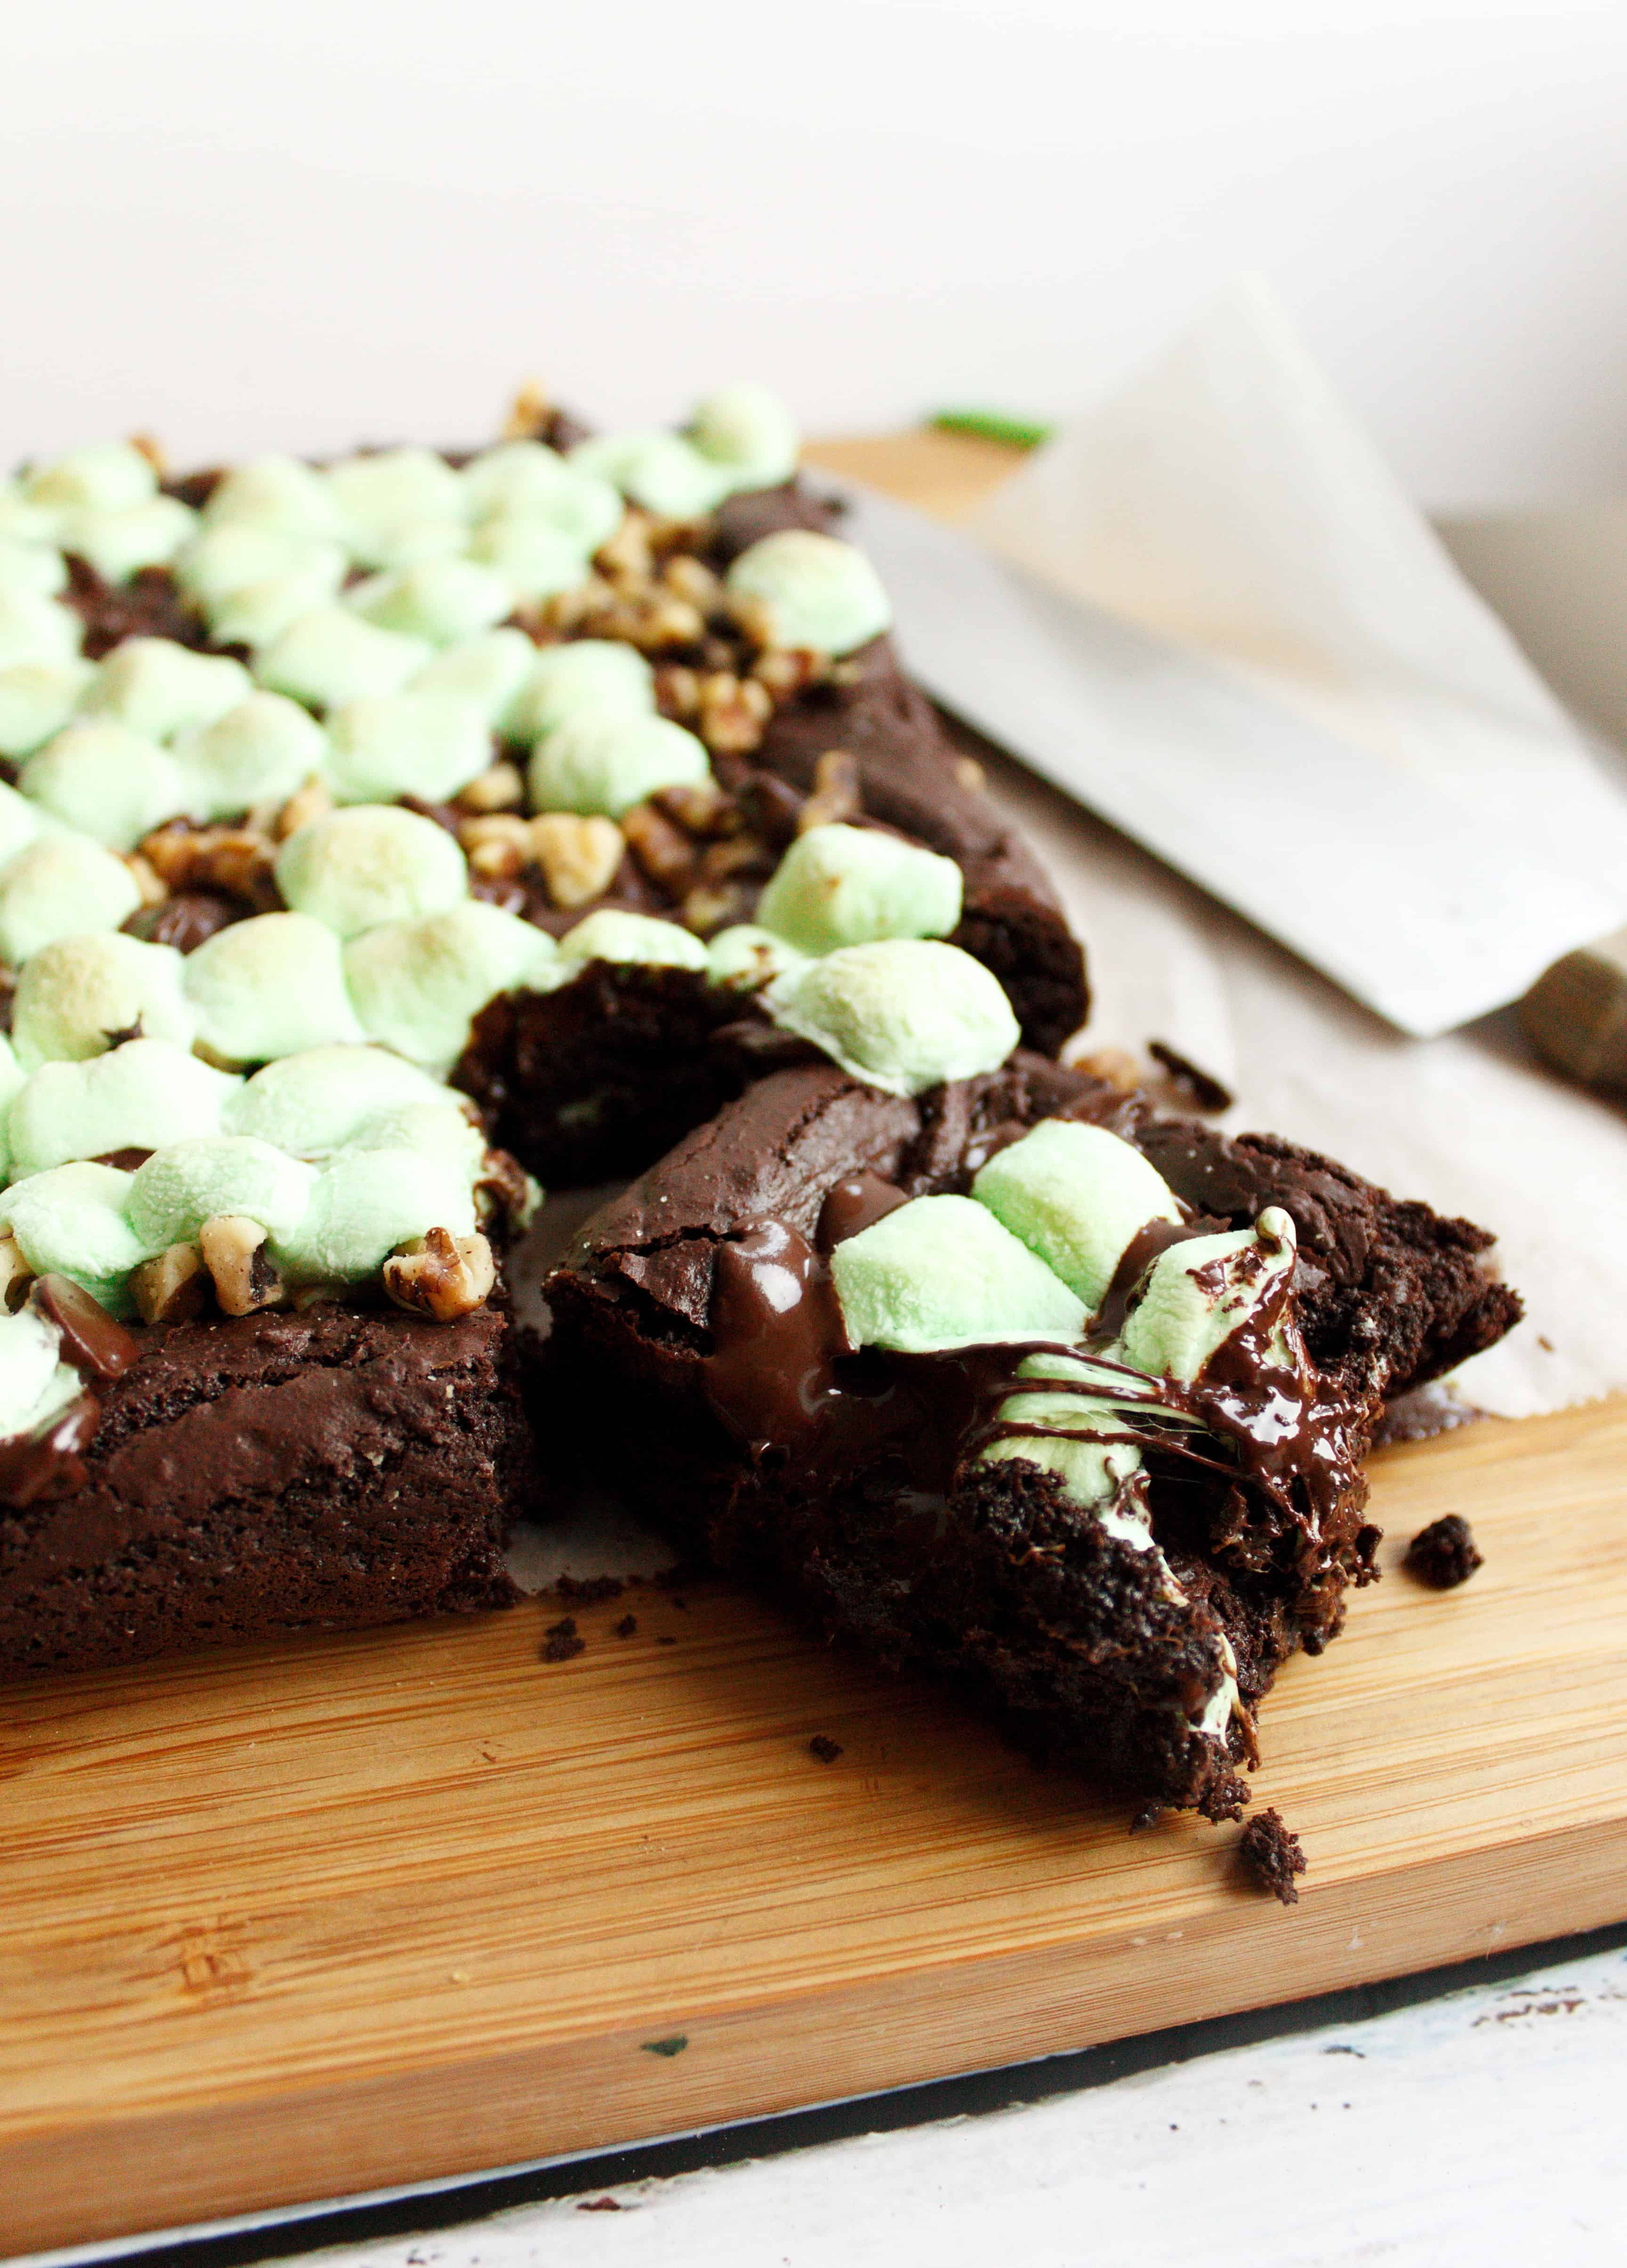 Brownies with marshmallows on top sit on a wooden cutting board